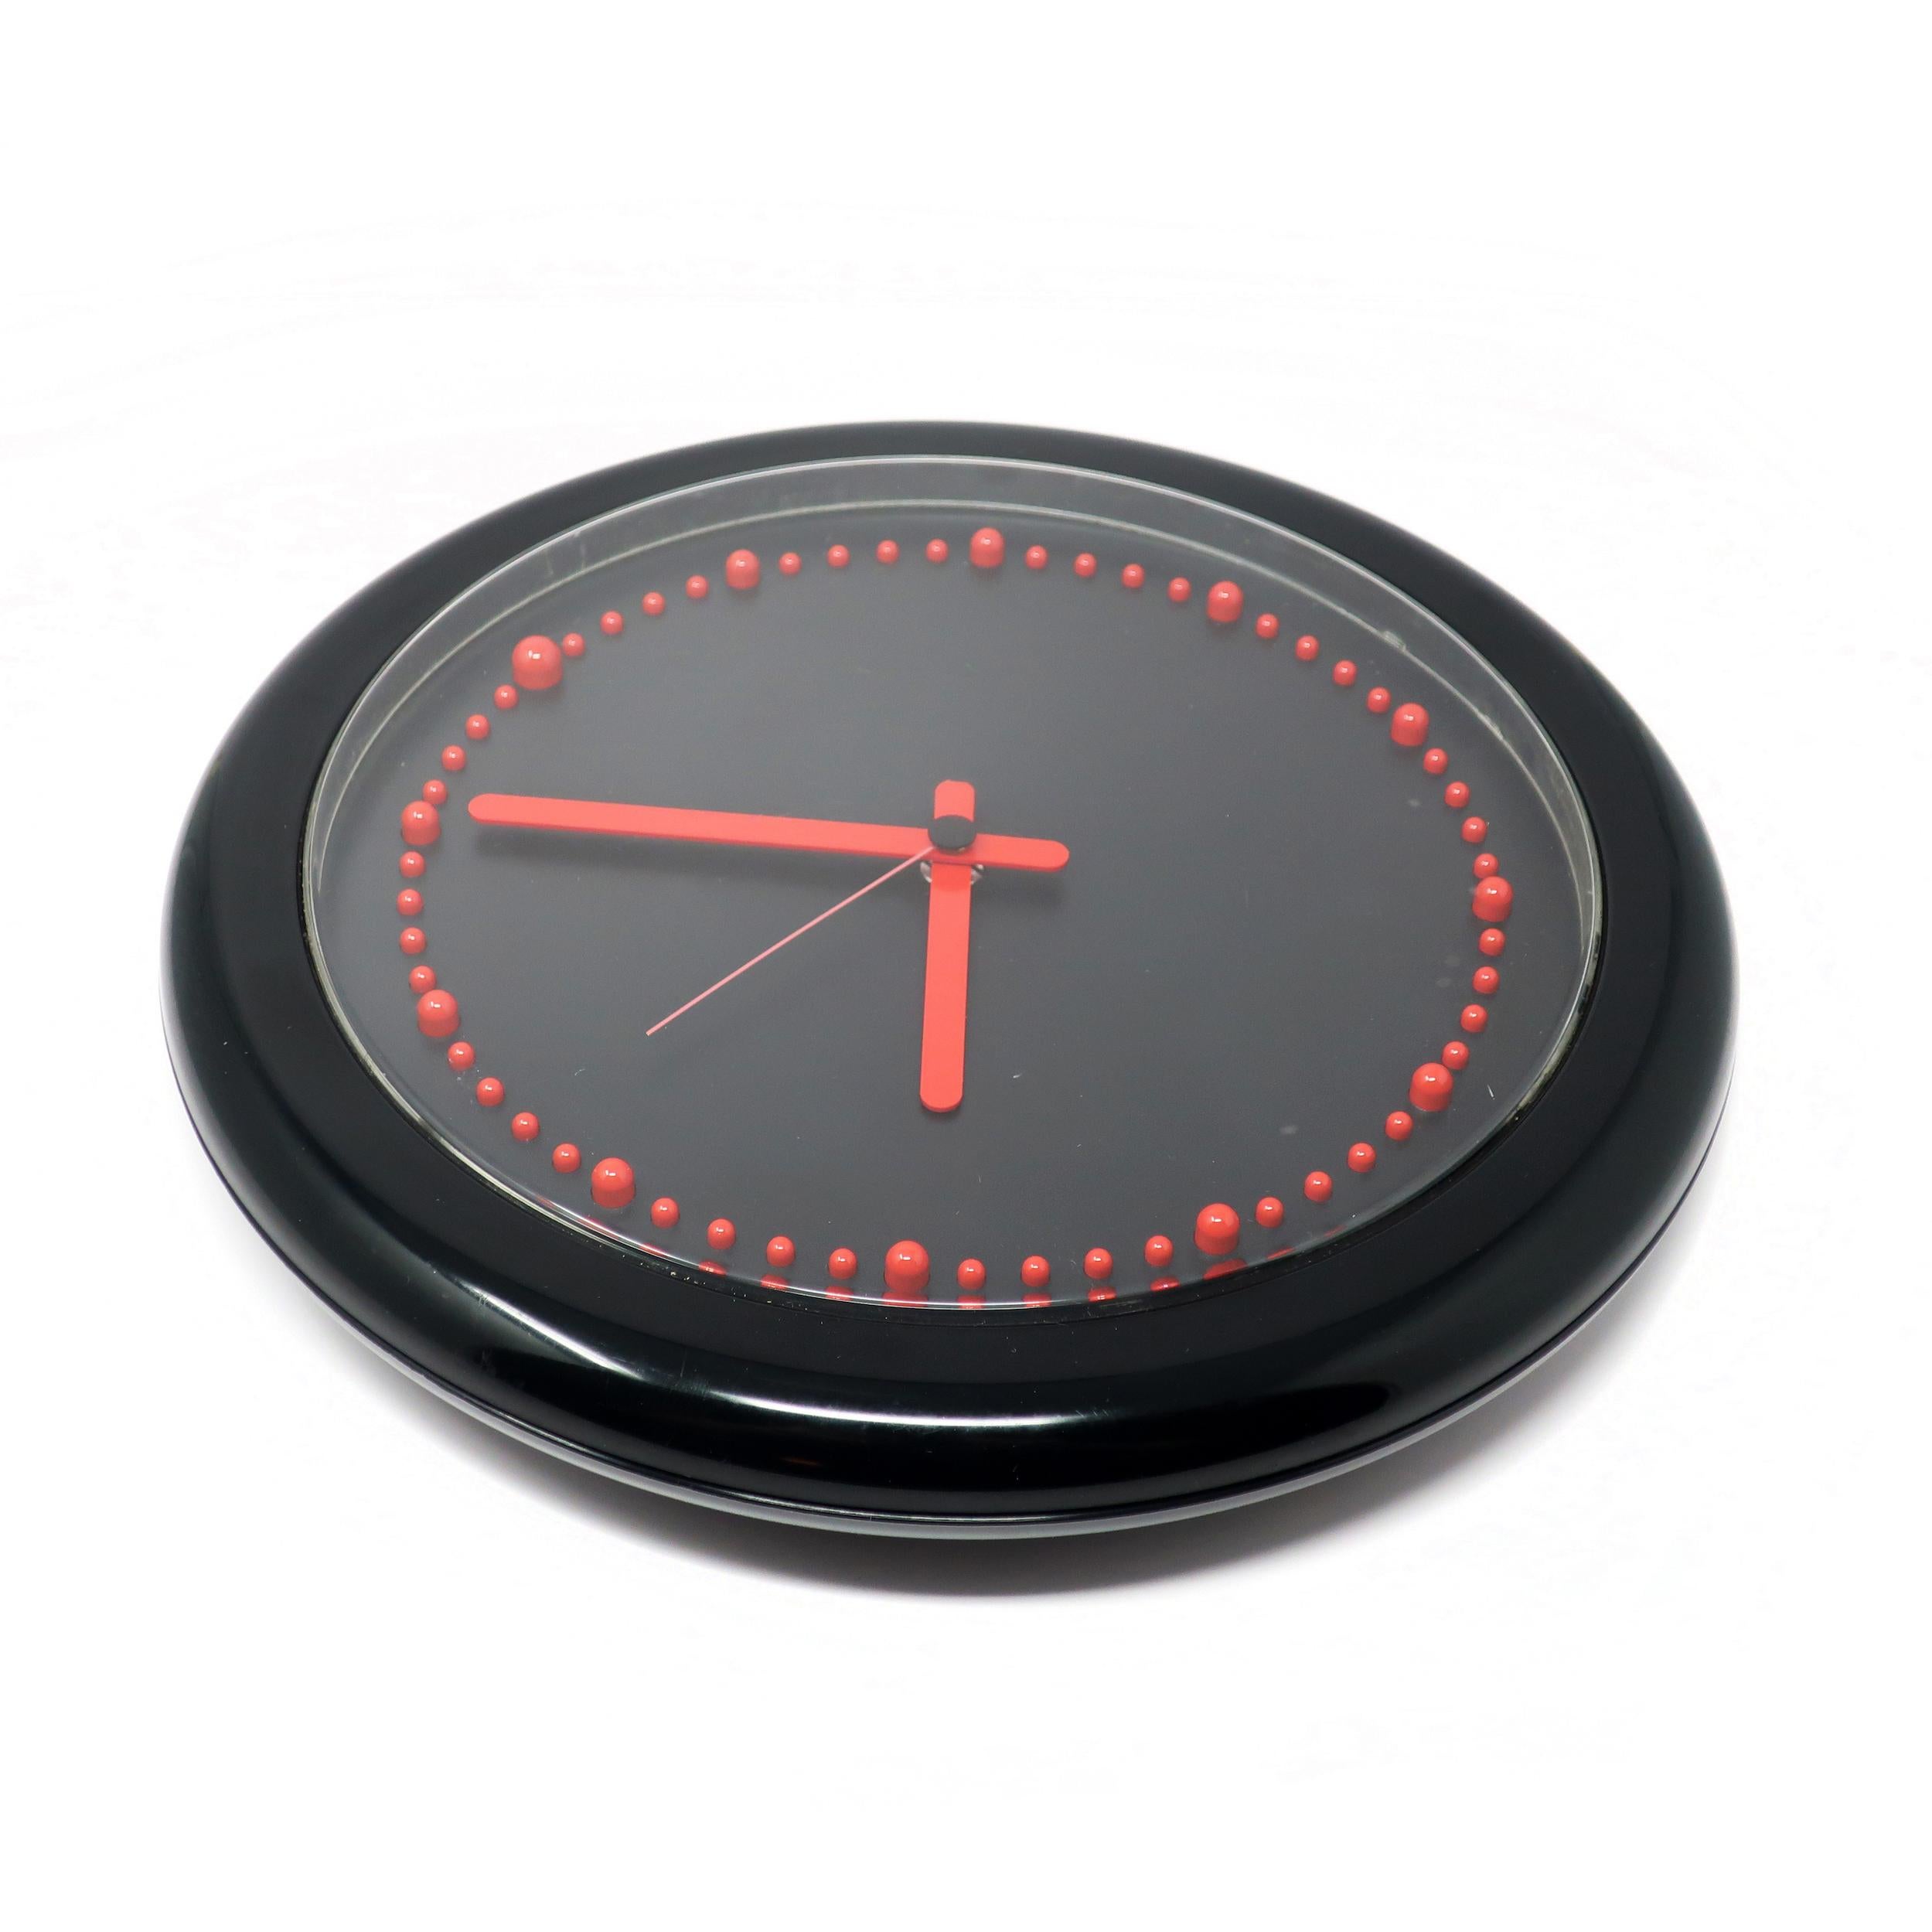 Designed by Raul Barbieri and Giorgio Marianelli for Rexite in 1981, this Zero 980 wall clock has a striking black and red combination. Black plastic case, REd hands, and raised red plastic bumps for the clock's numbers and a black face. Perfect